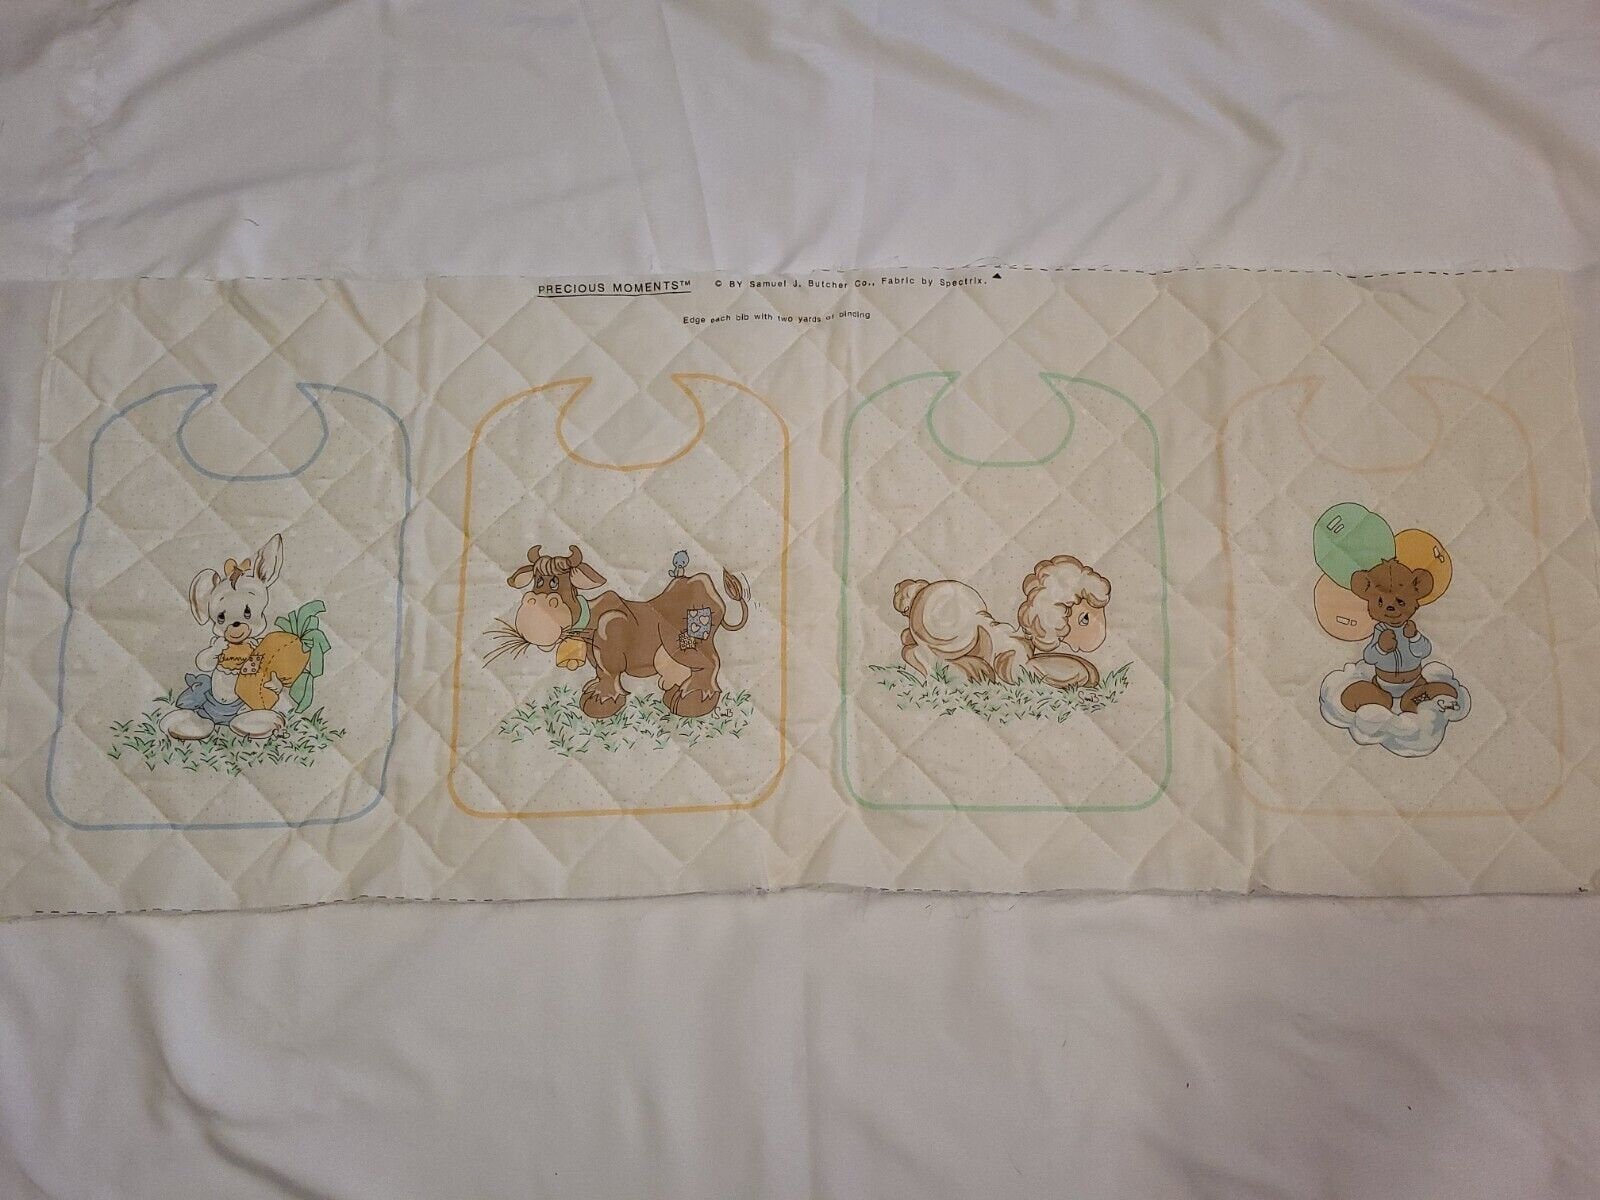 Vintage Rare Precious Moments Stamped Cross Stitch Baby Quilt Kit